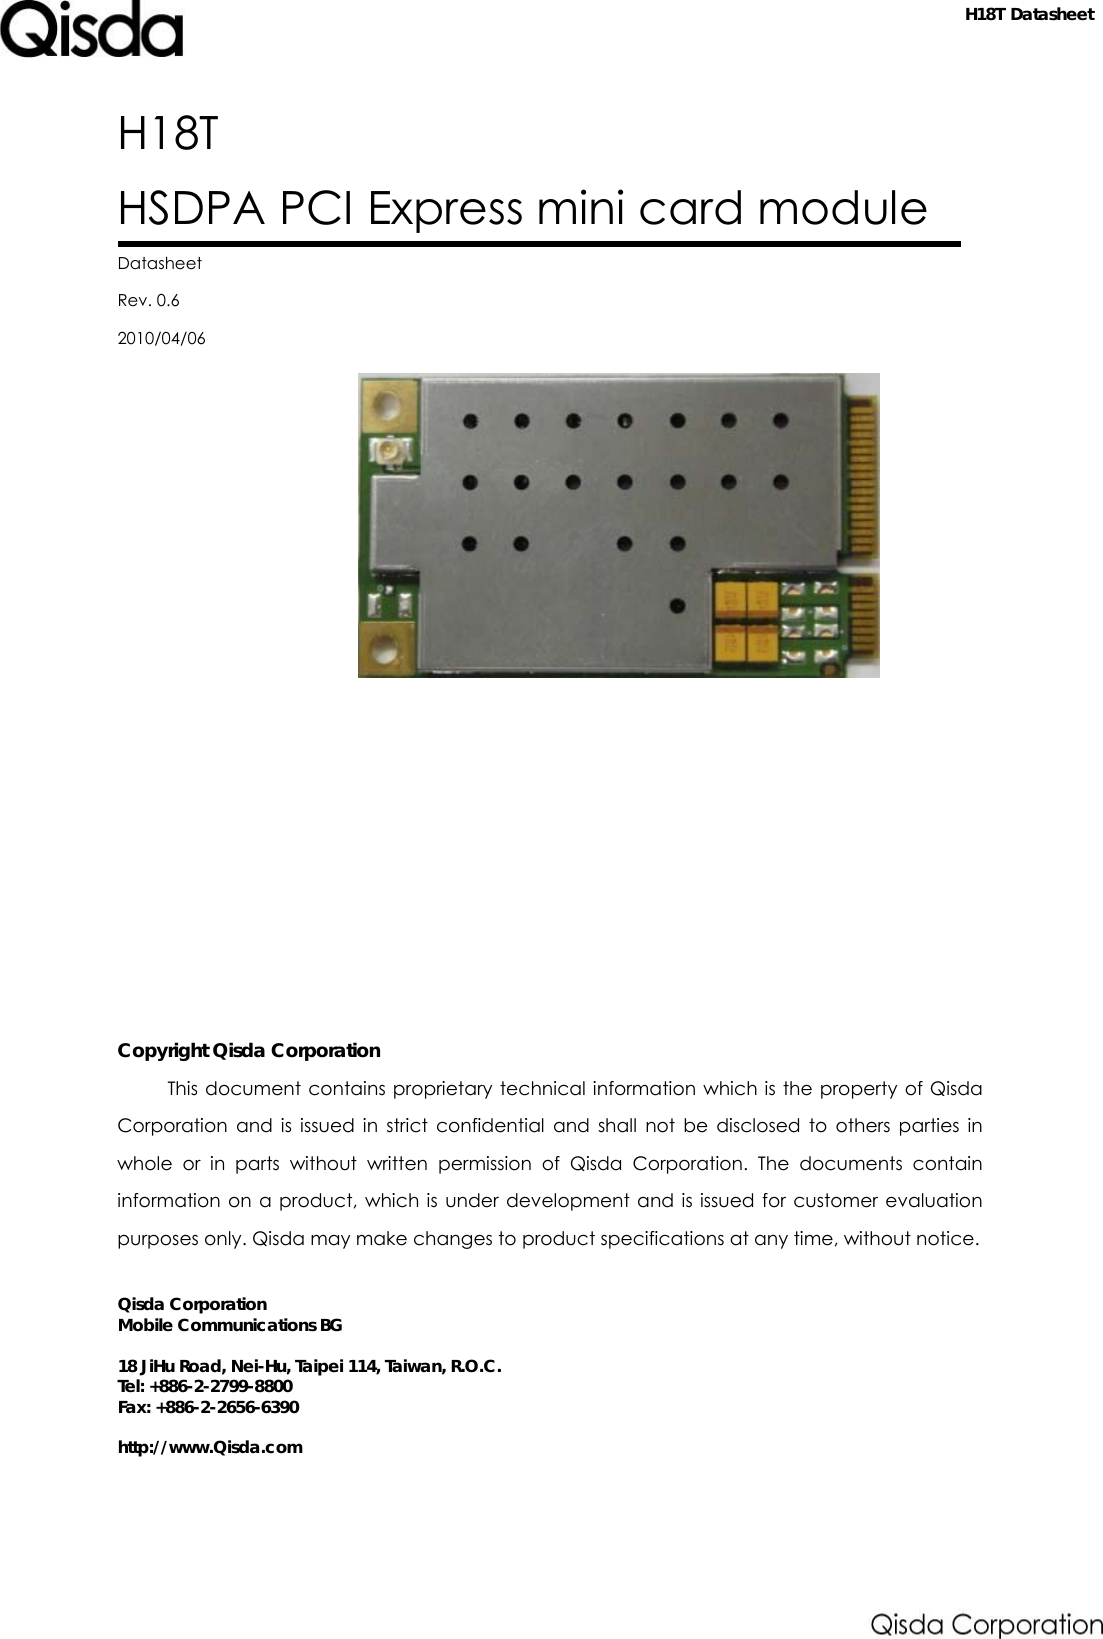   Datasheet H18T HSDPA PCI Express mini card module  Datasheet Rev. 0.6 2010/04/06           Copyright Qisda Corporation This document contains proprietary technical information which is the property of Qisda Corporation and is issued in strict confidential and shall not be disclosed to others parties in whole or in parts without written permission of Qisda Corporation. The documents contain information on a product, which is under development and is issued for customer evaluation purposes only. Qisda may make changes to product specifications at any time, without notice.  Qisda Corporation Mobile Communications BG  18 JiHu Road, Nei-Hu, Taipei 114, Taiwan, R.O.C. Tel: +886-2-2799-8800 Fax: +886-2-2656-6390  http://www.Qisda.com  H18T Datasheet 